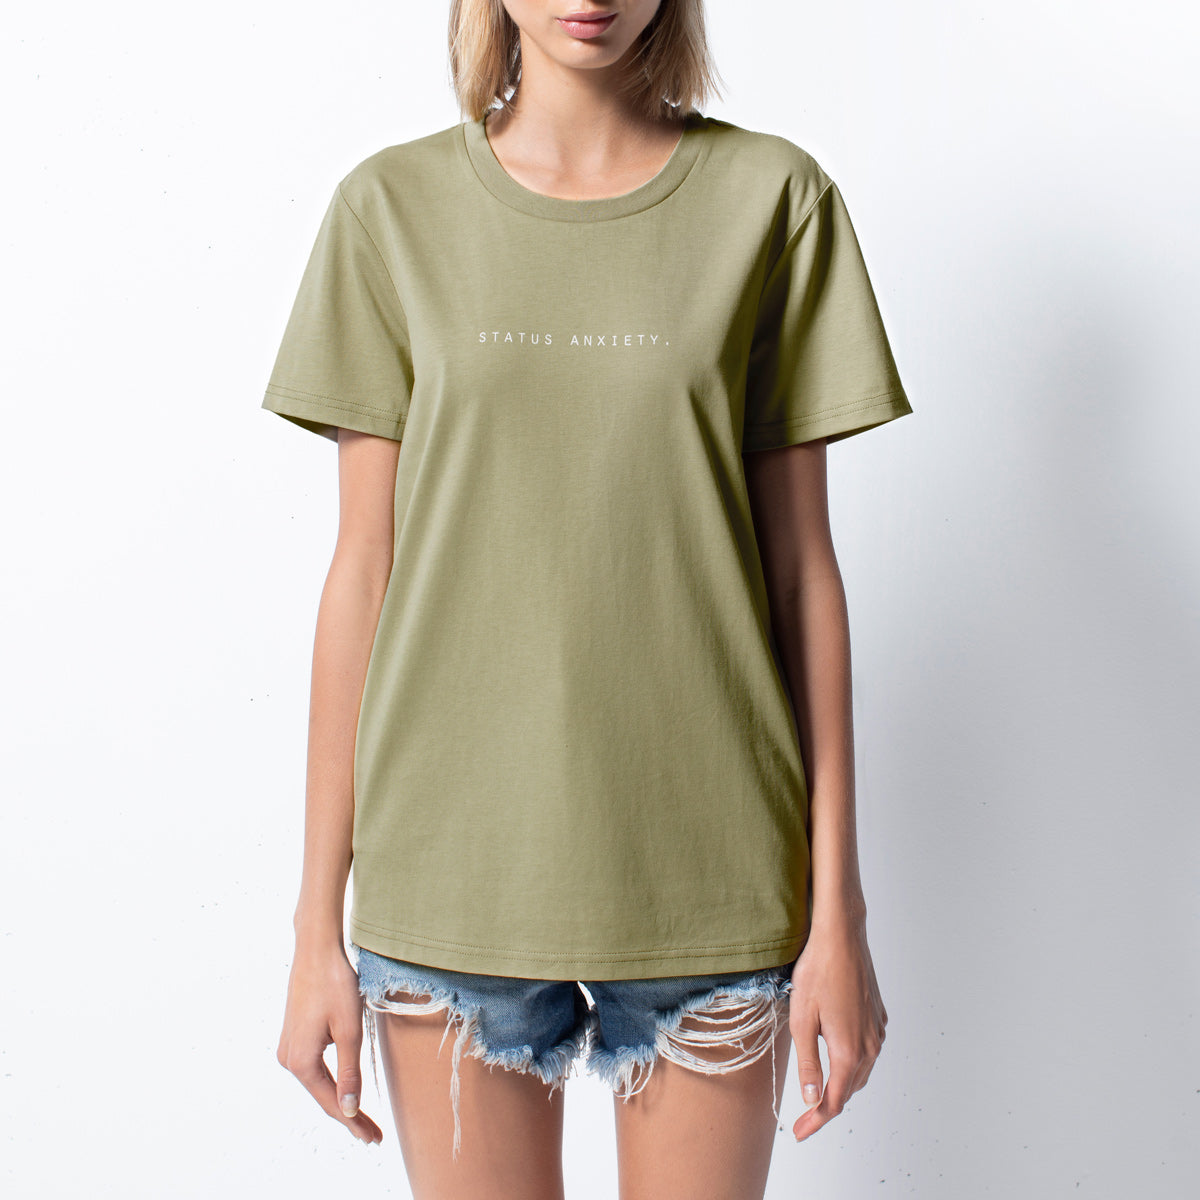 THINK IT OVER WOMEN'S - Classic Tee / Sage